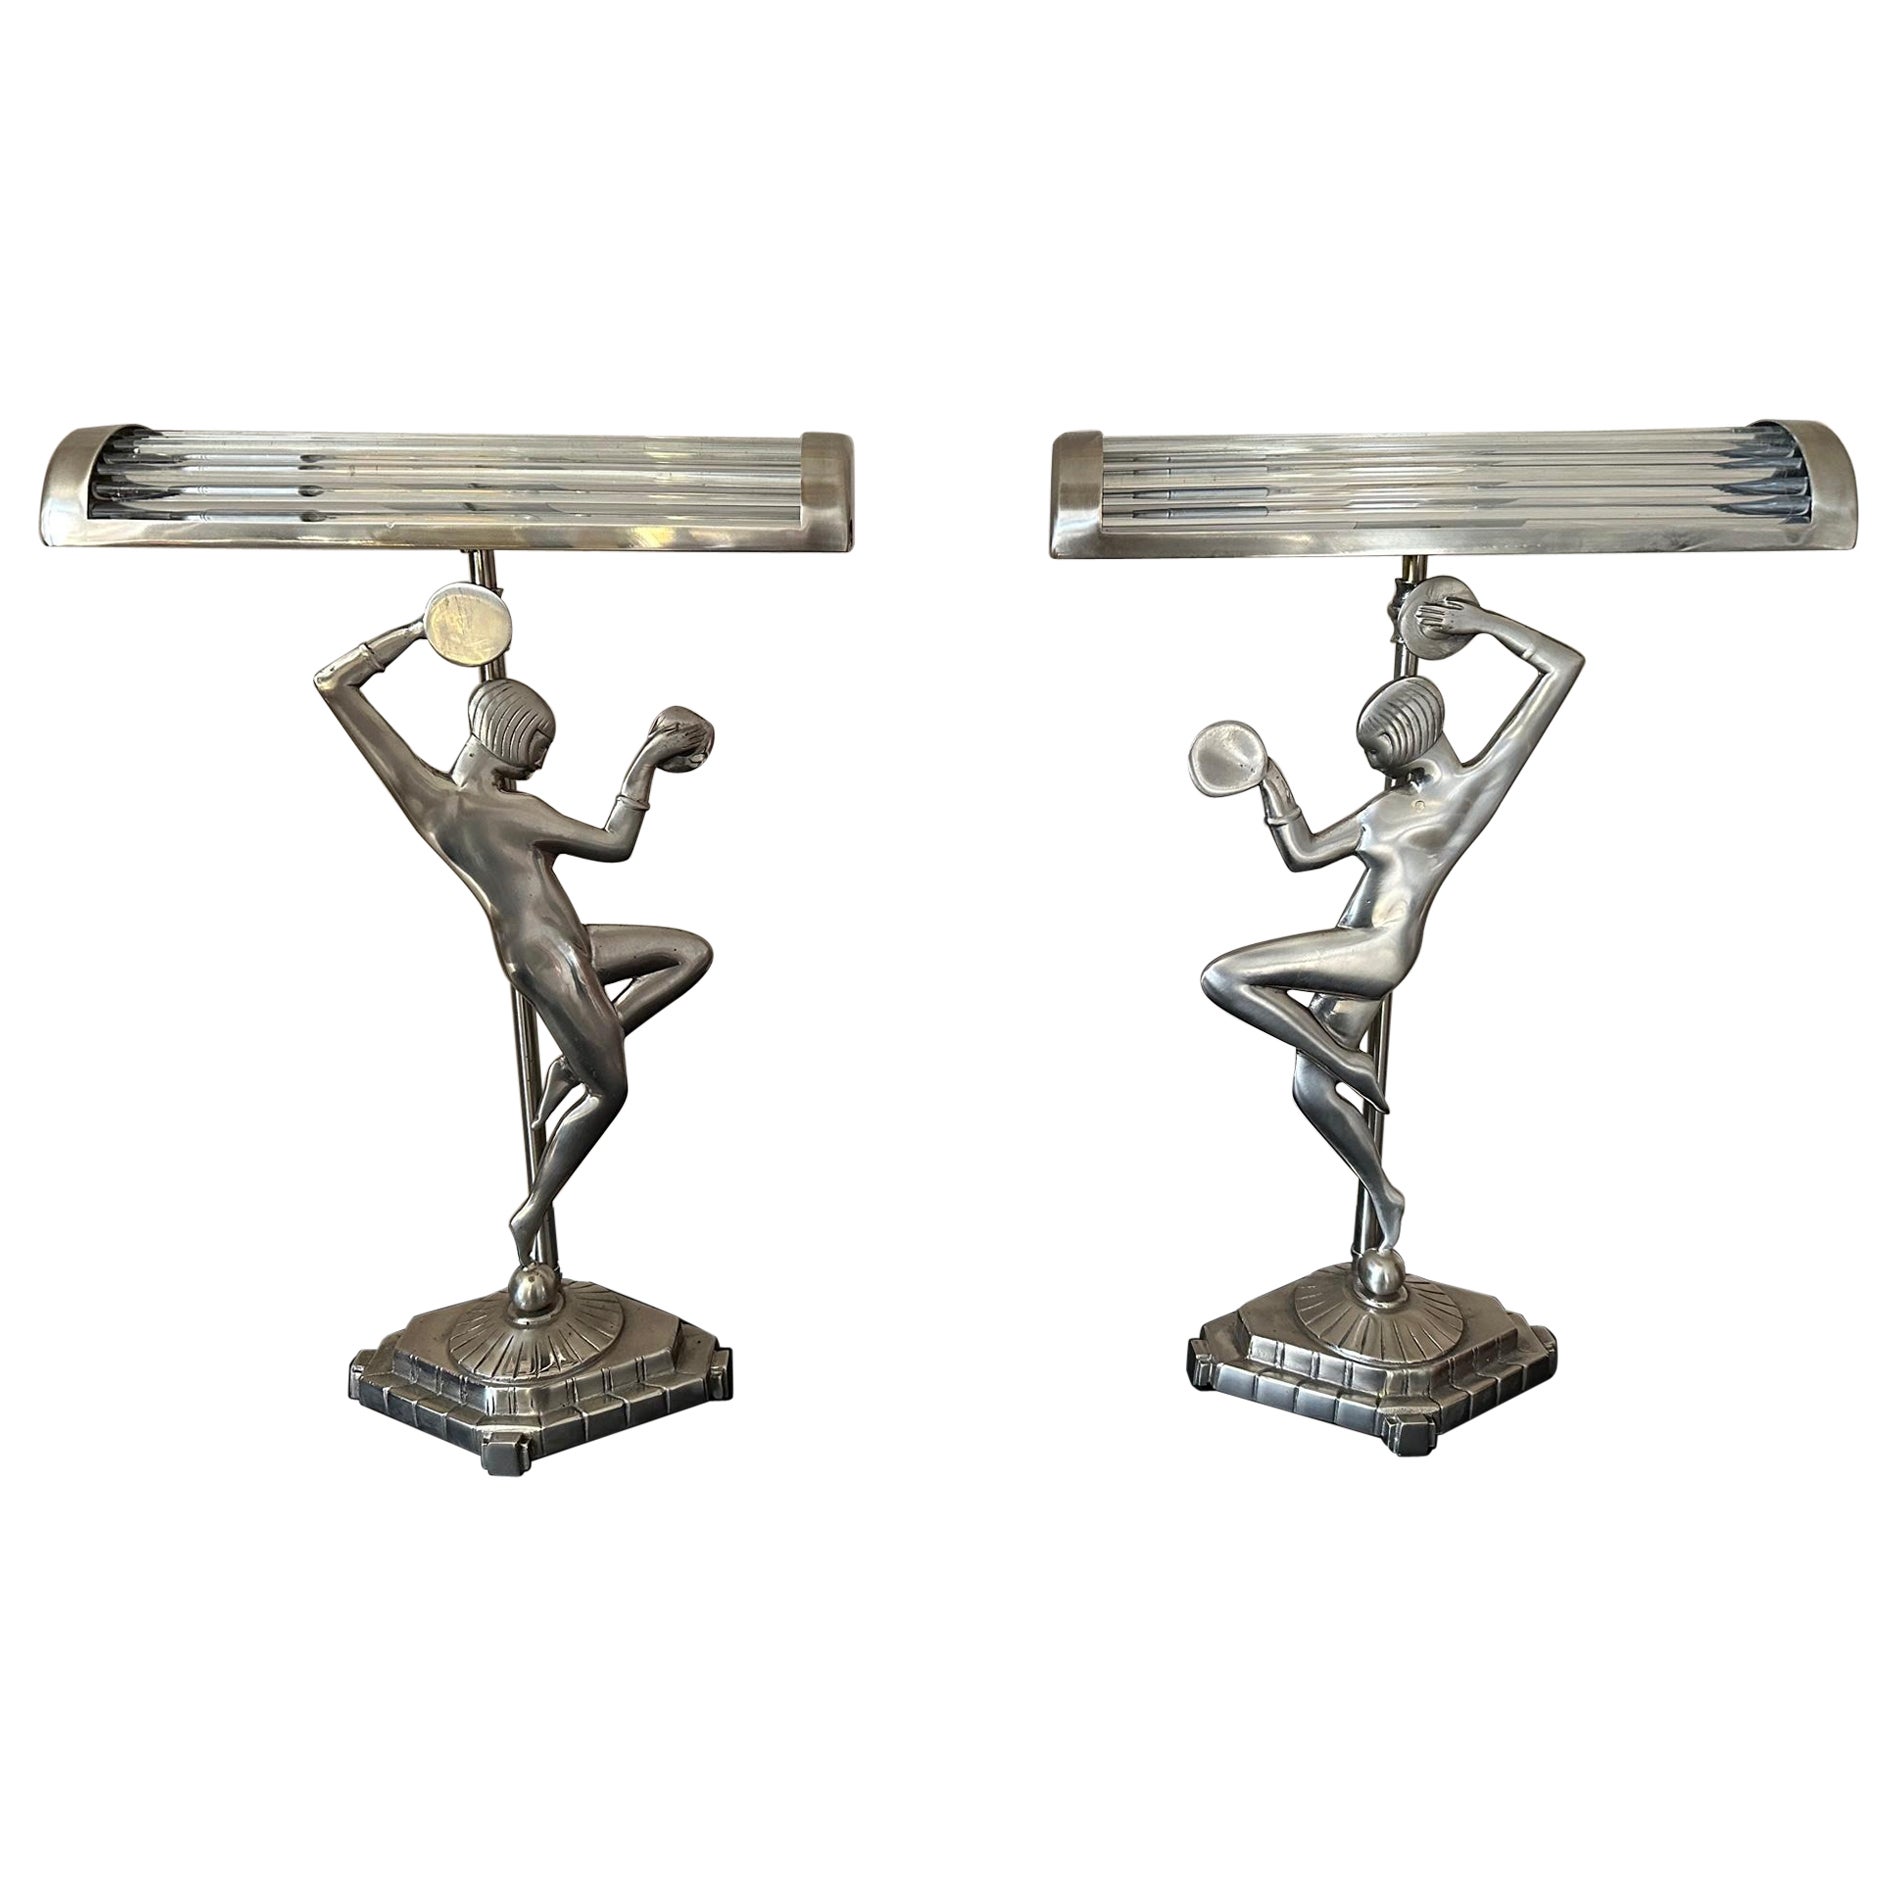 20th century French Pair of Art deco Chromed Metal Table Lamp, 1930s